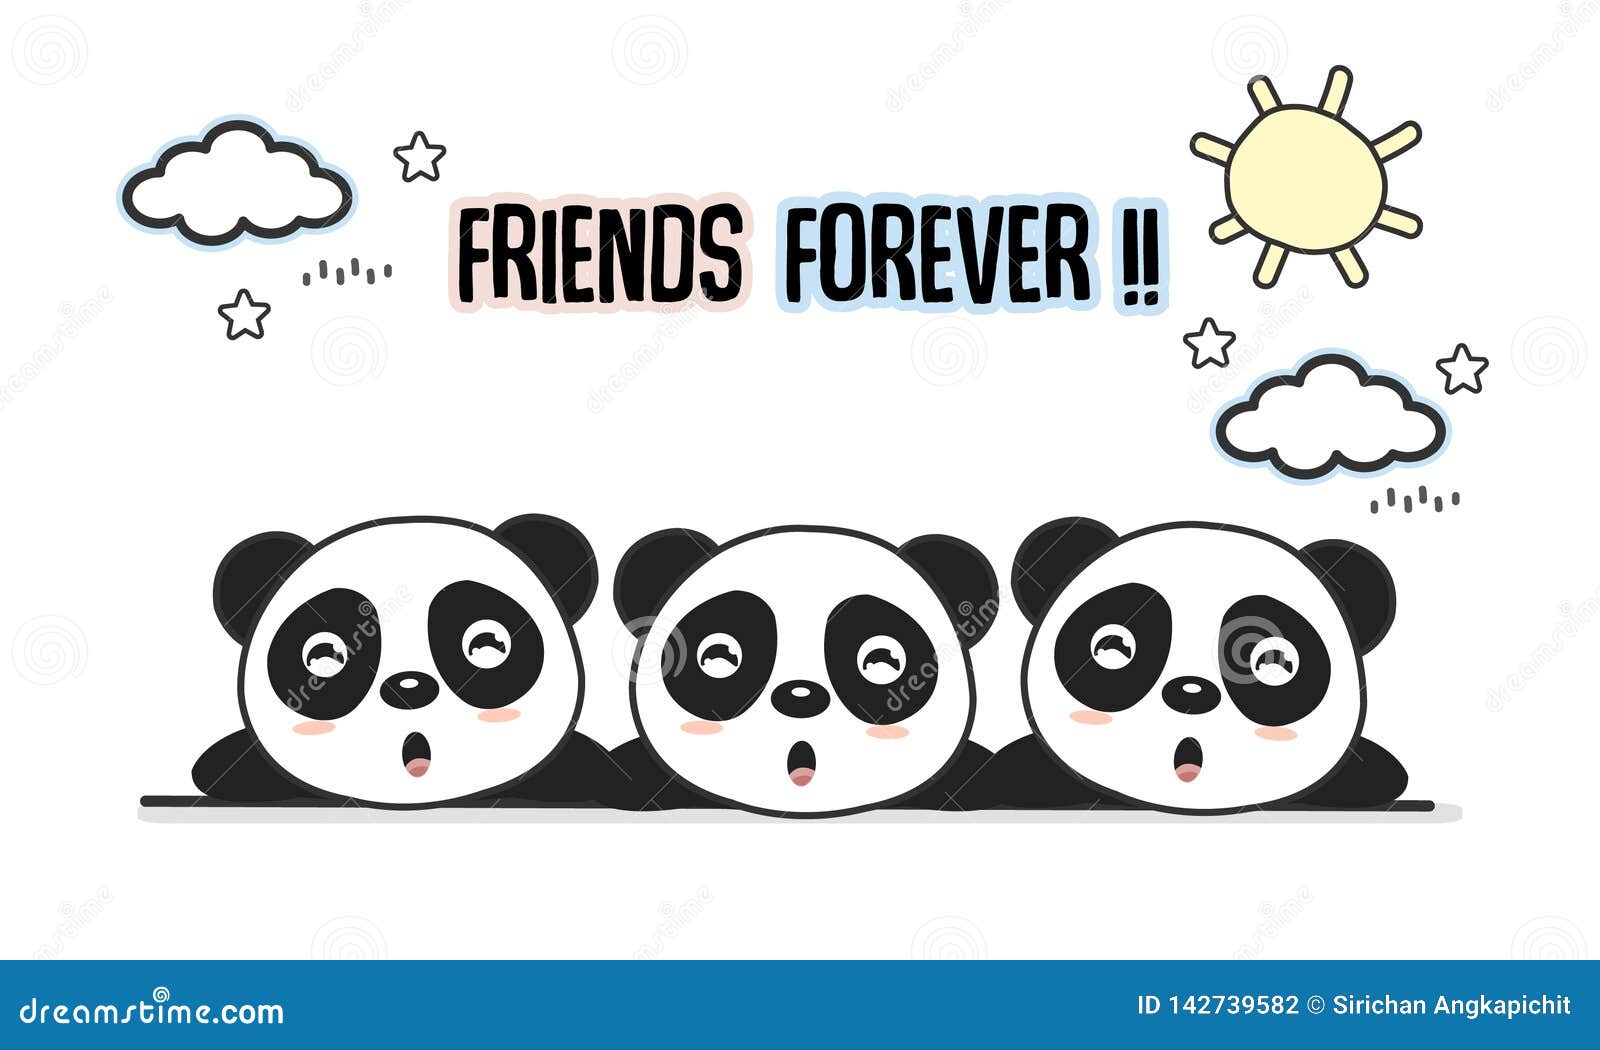 Friends Forever Greeting Card with Little Animals. Cute Pandas Cartoon  Vector Illustration Stock Vector - Illustration of friendship, lettering:  142739582